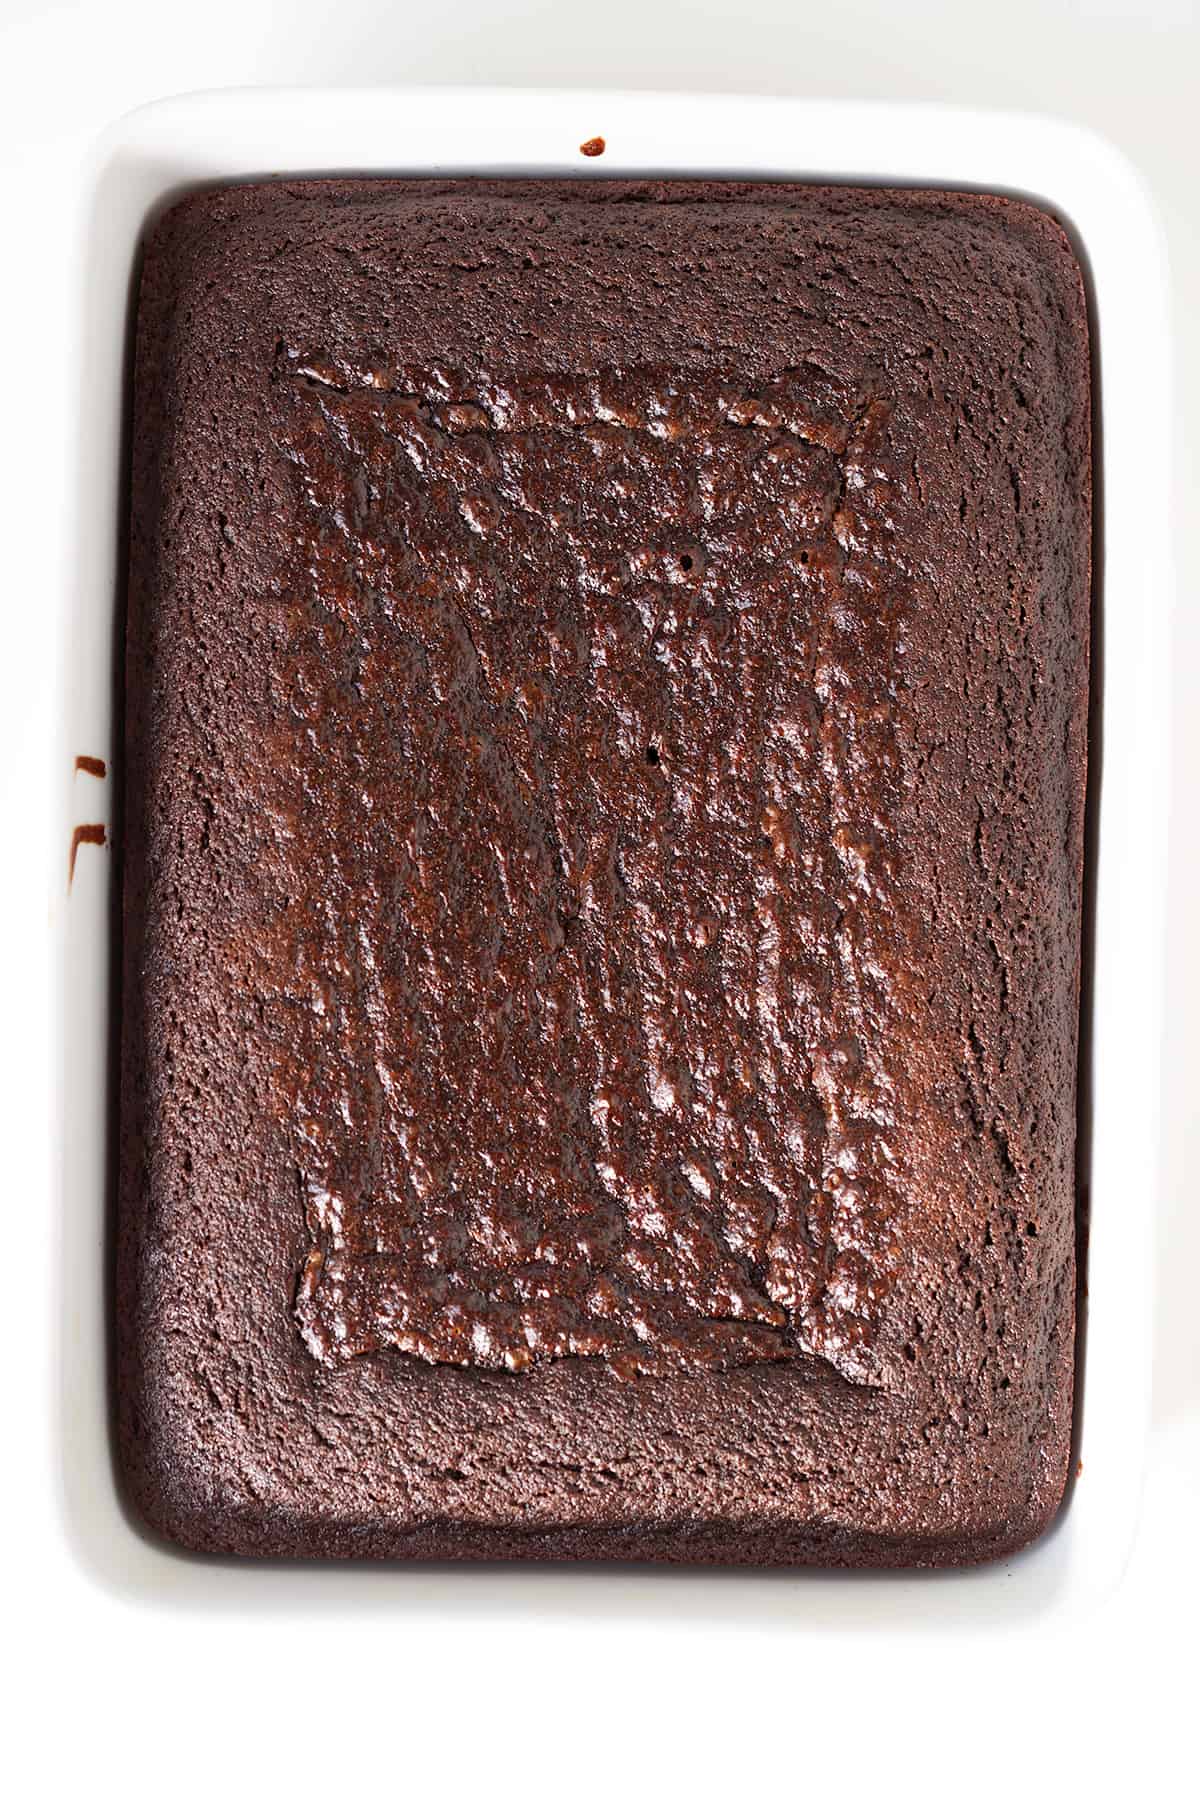 Chocolate stout cake in a square dish on a white surface.